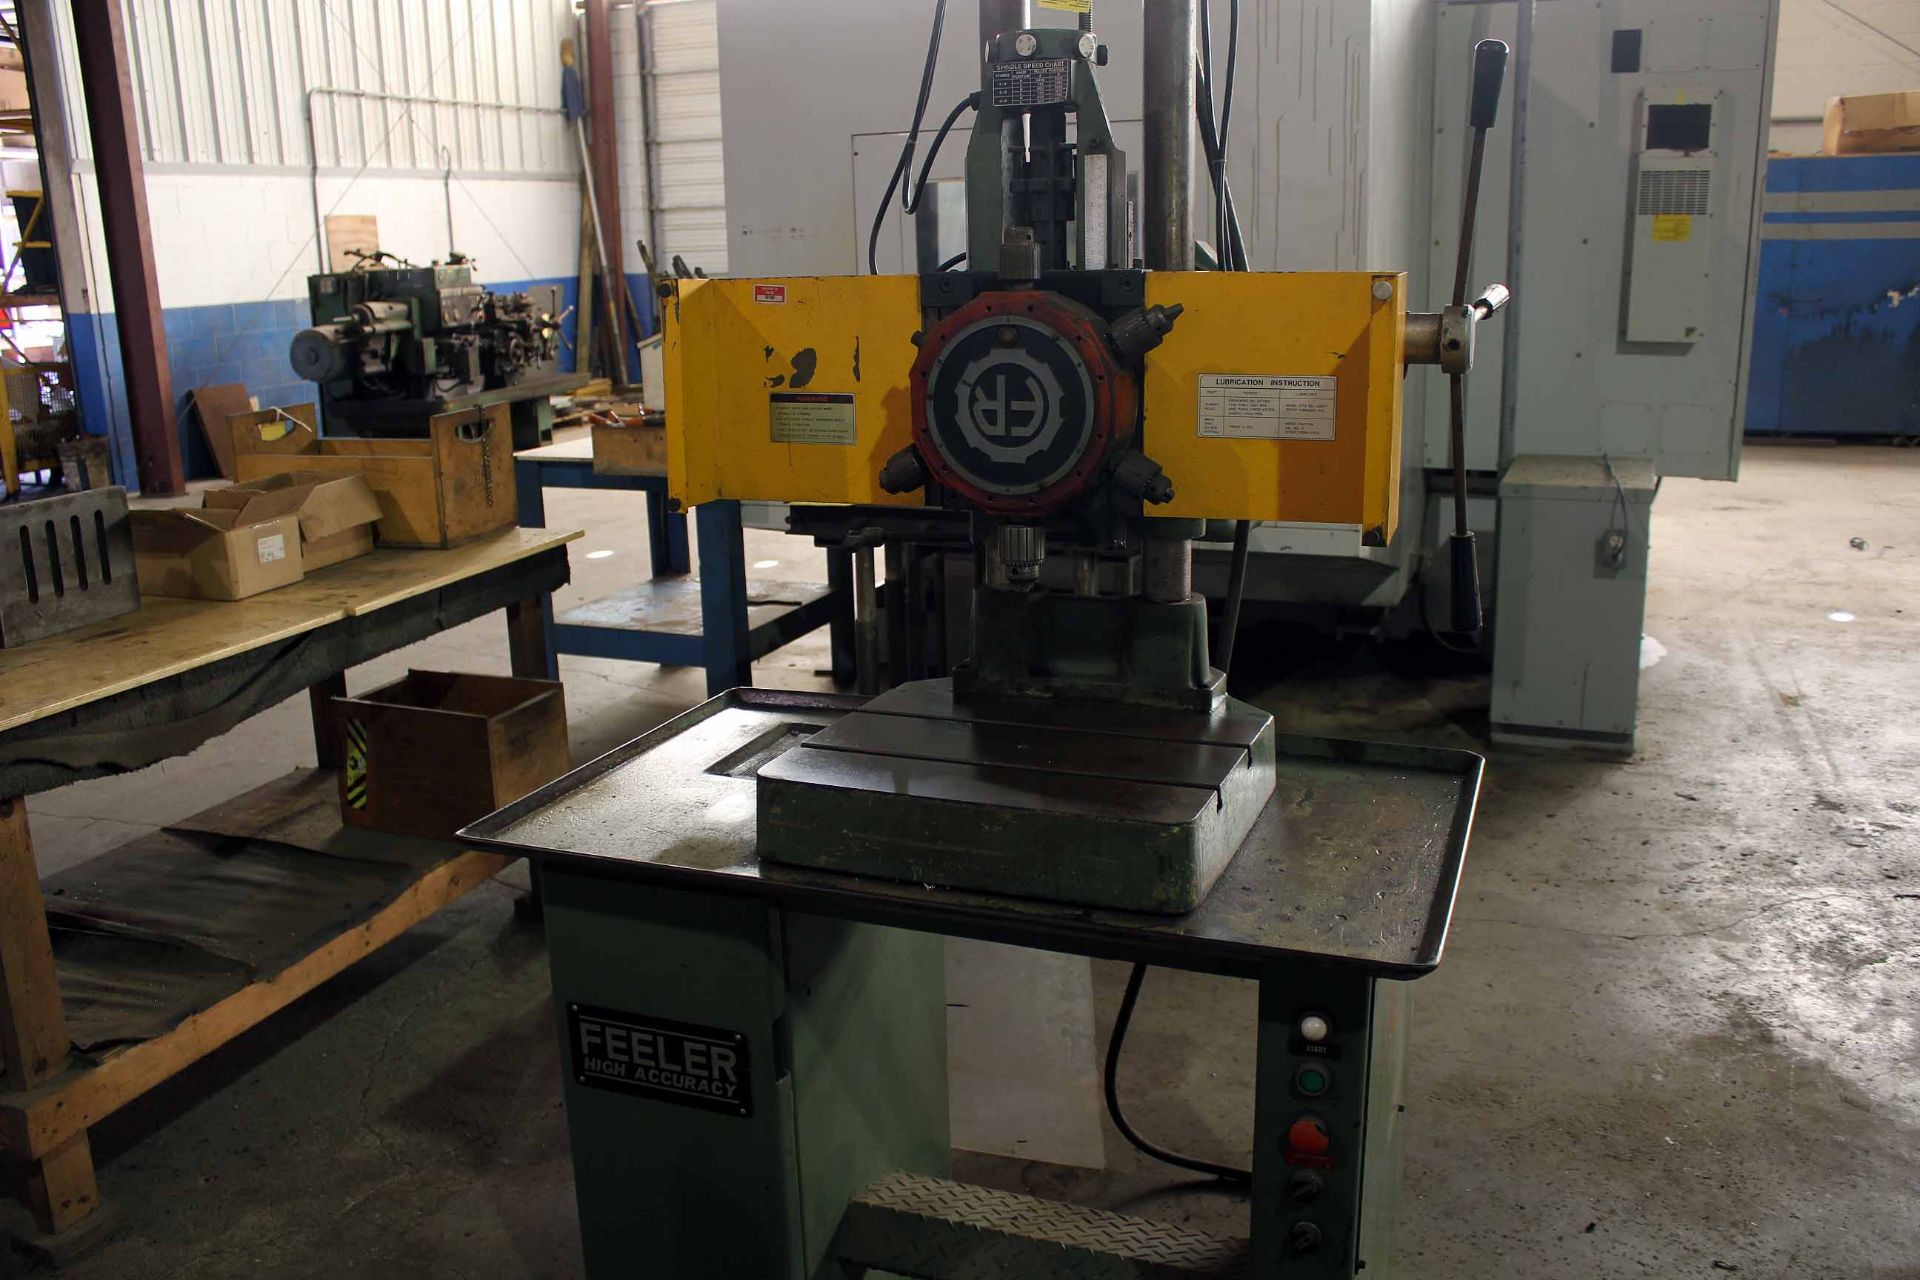 TURRET DRILL, FEELER TYPE FPC-12 6-STATION, spds: 300-3900 RPM, 1 HP motor, cabinet base, S/N